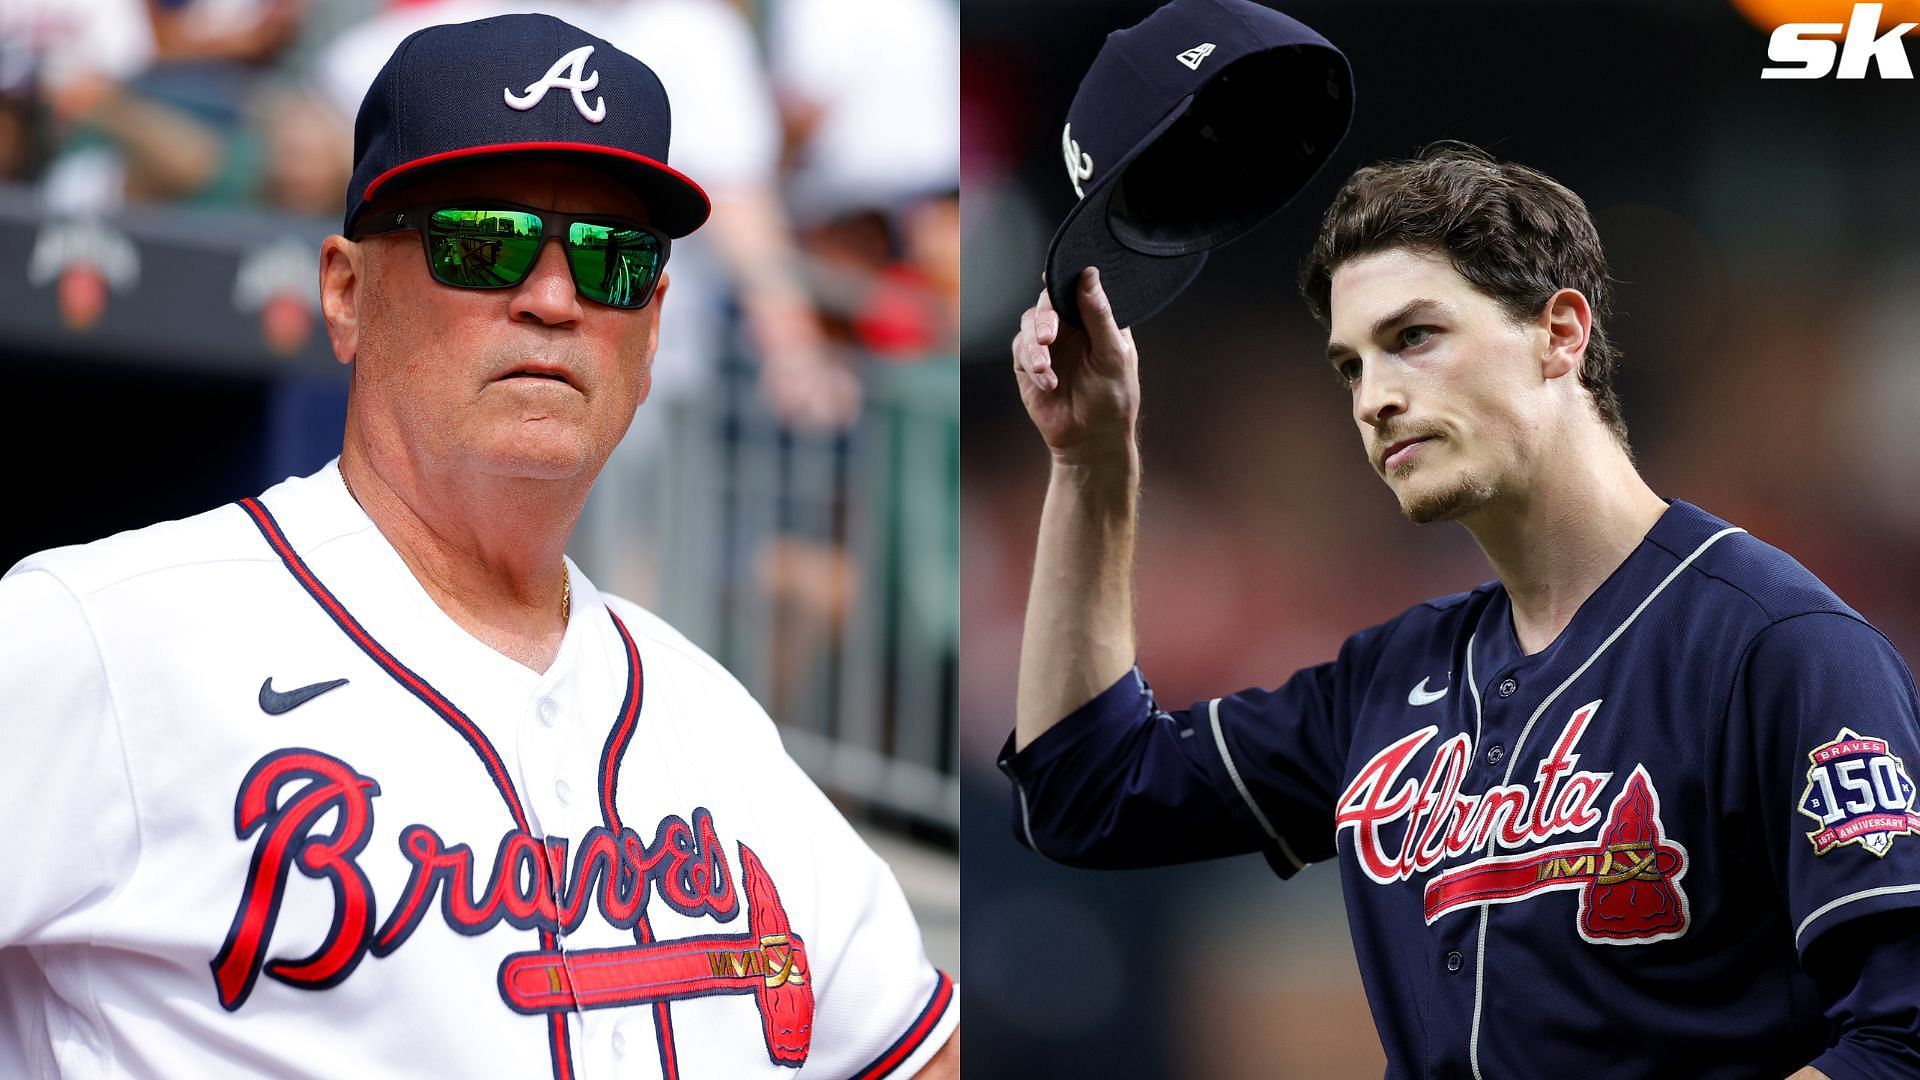 Braves manager Brian Snitker heaps huge praise on Max Fried following excellent shutout